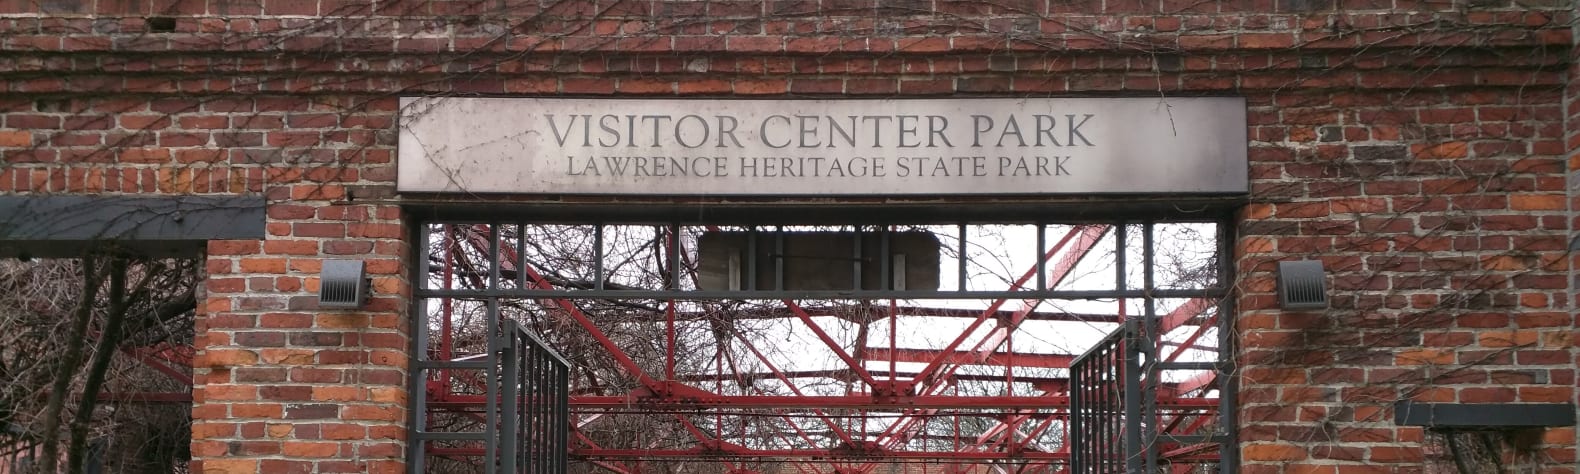 Lawrence Heritage State Park